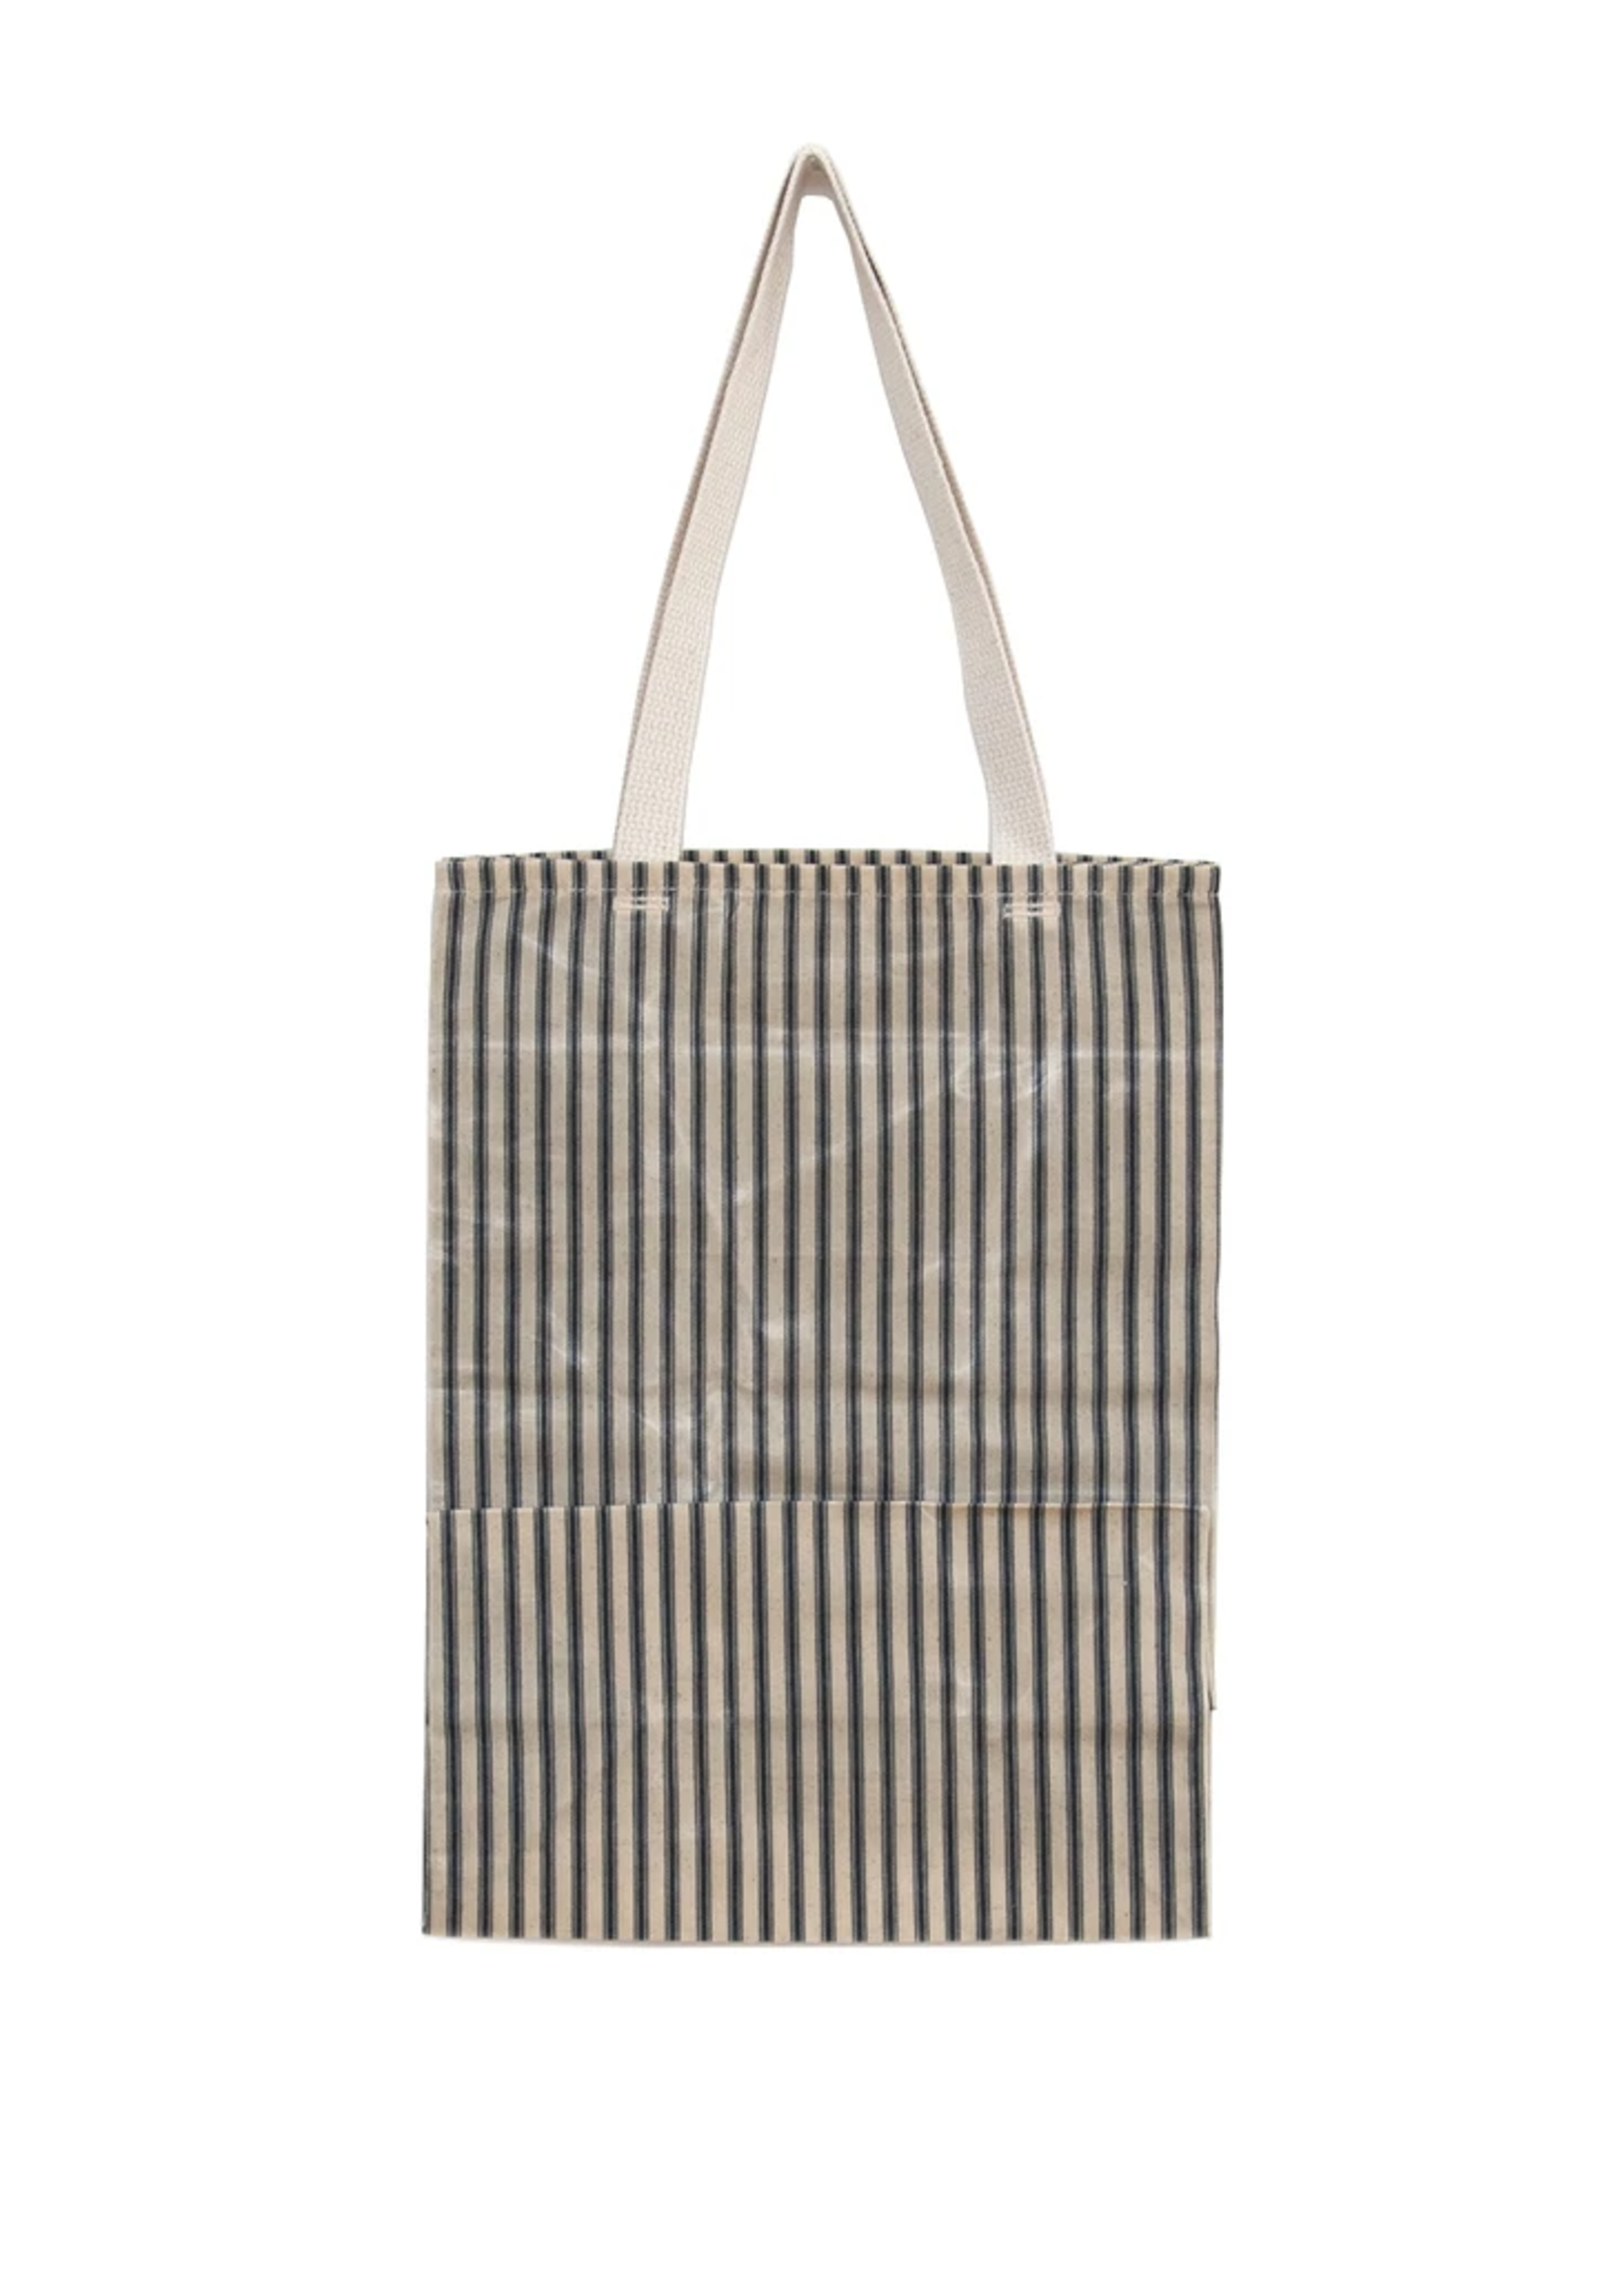 WAAM Industries Eco-Friendly Grocery Tote - Navy Striped